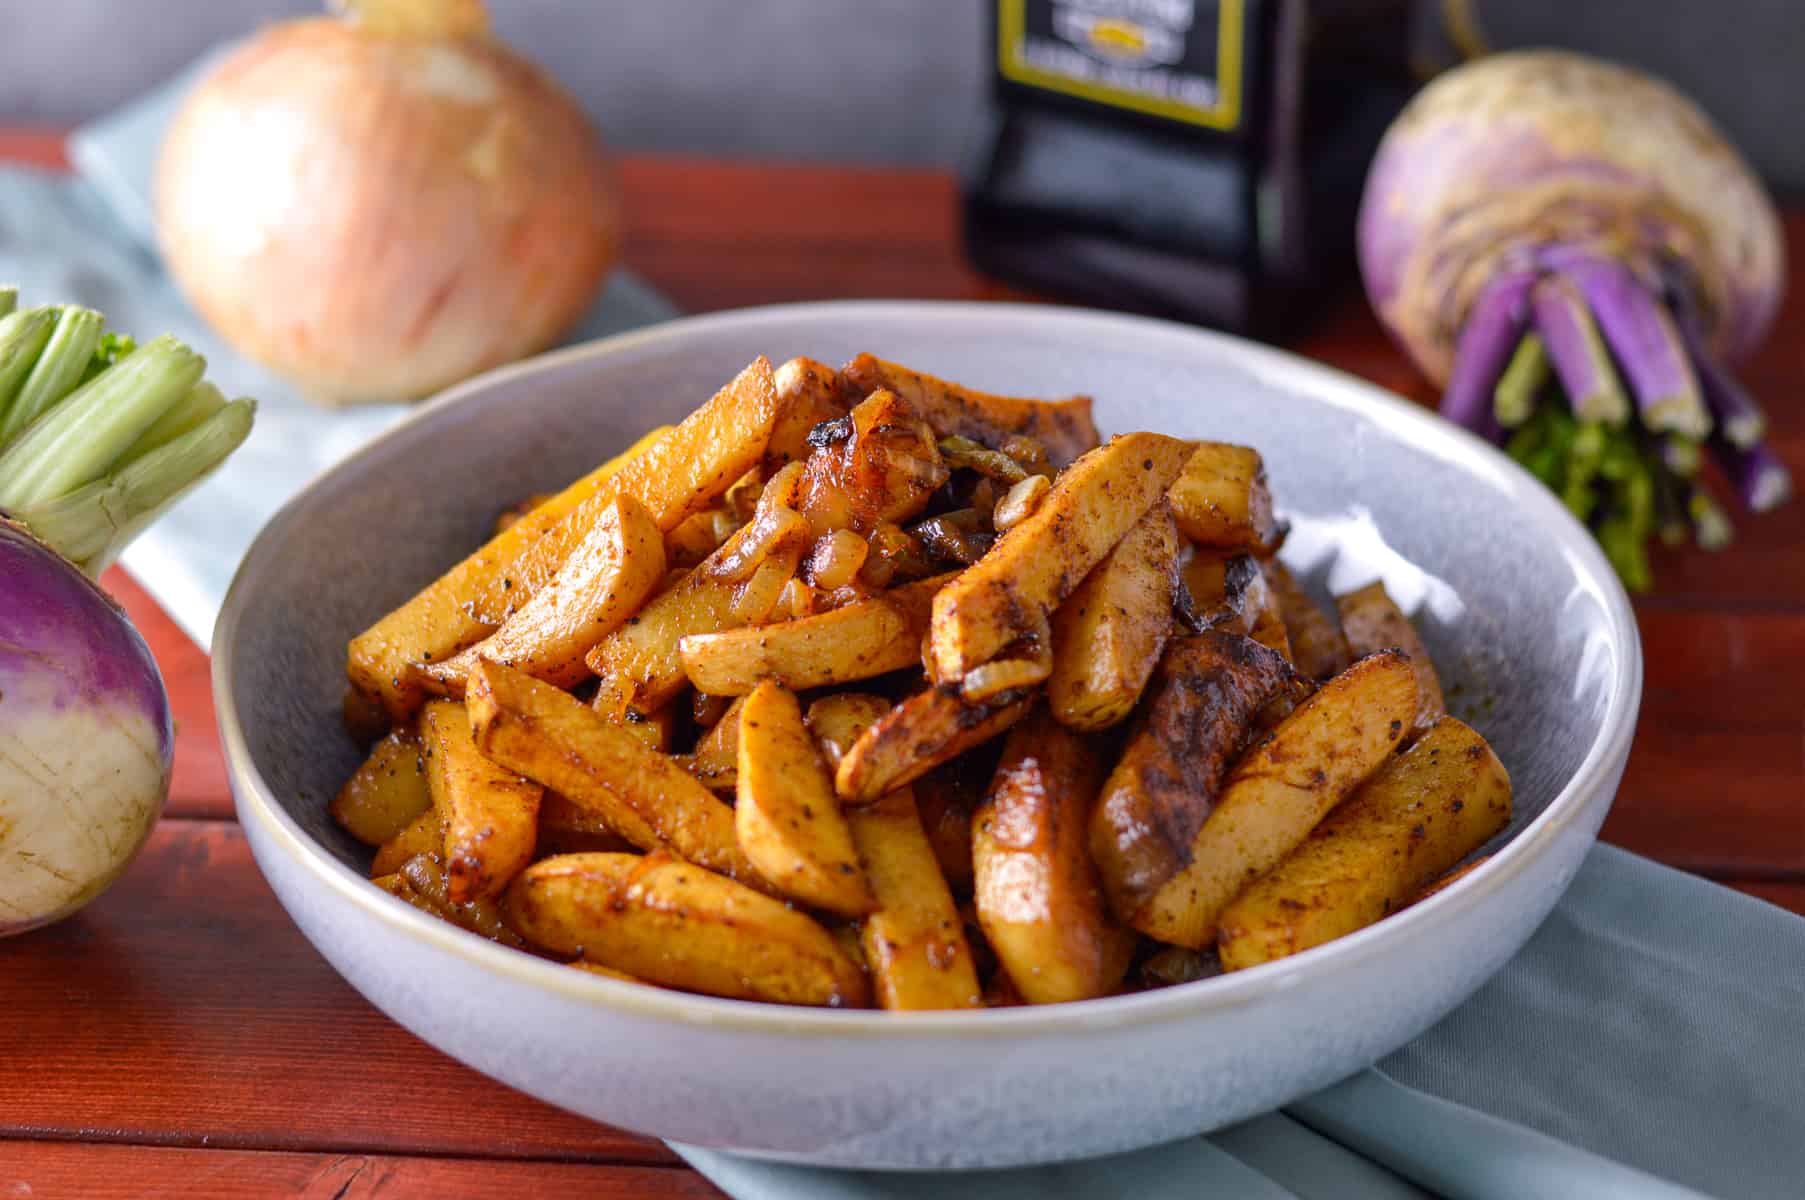 roasted, caramelized turnips cut into fat fries in serving bowl with 2 purple top turnips on the side and behind, onion and balsamic vinegar bottle in background